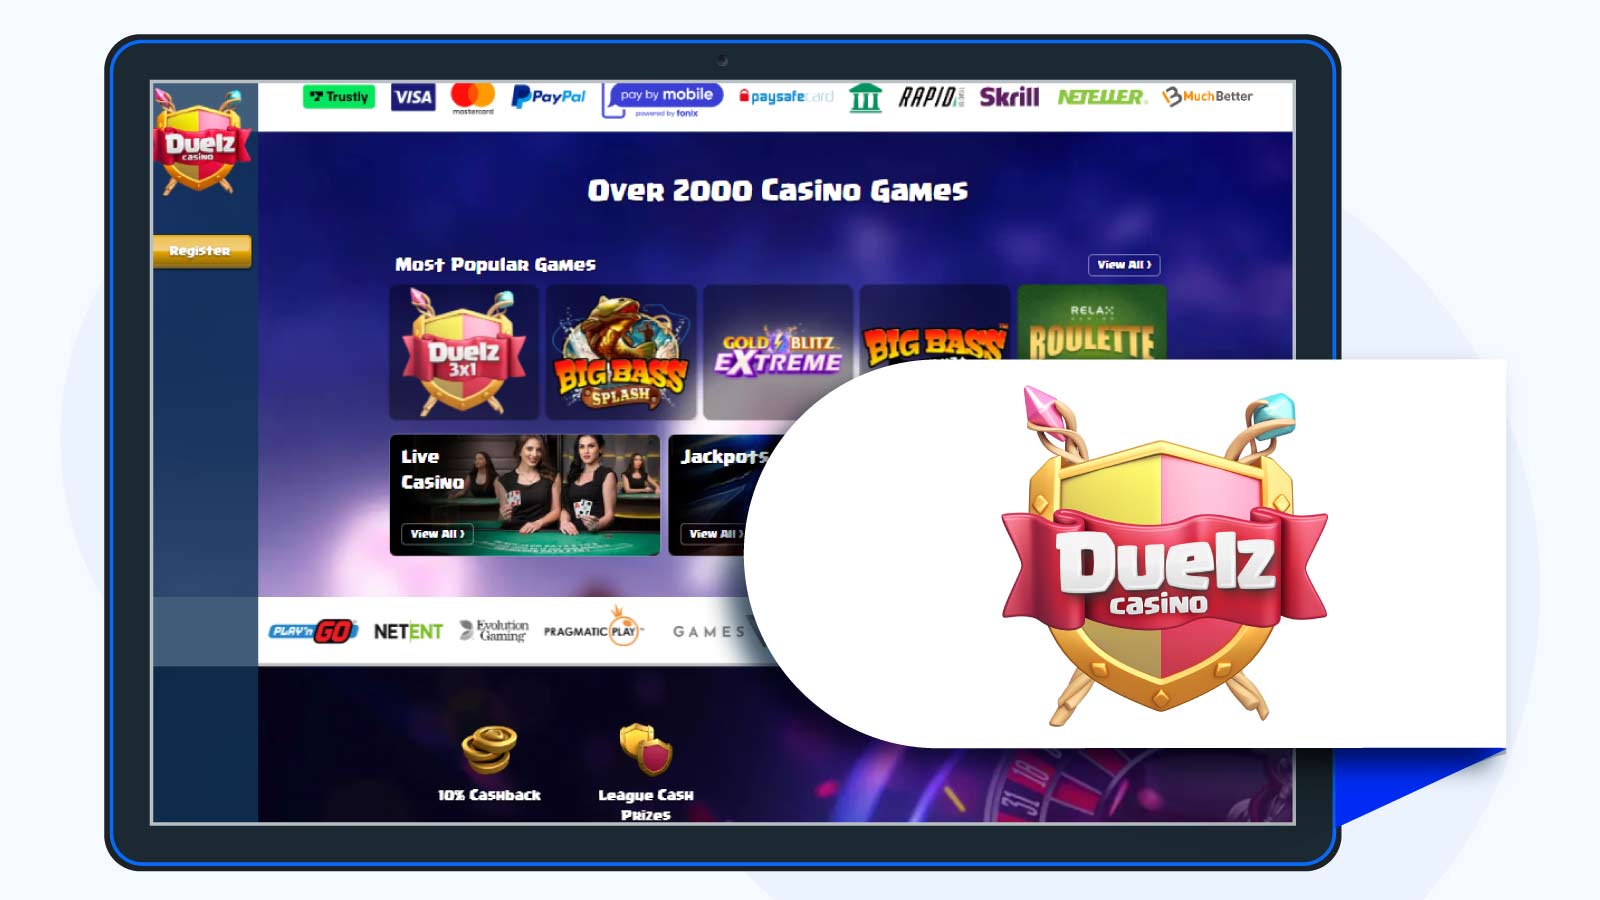 Duelz Casino Best MuchBetter Deposit and Withdrawal Limits